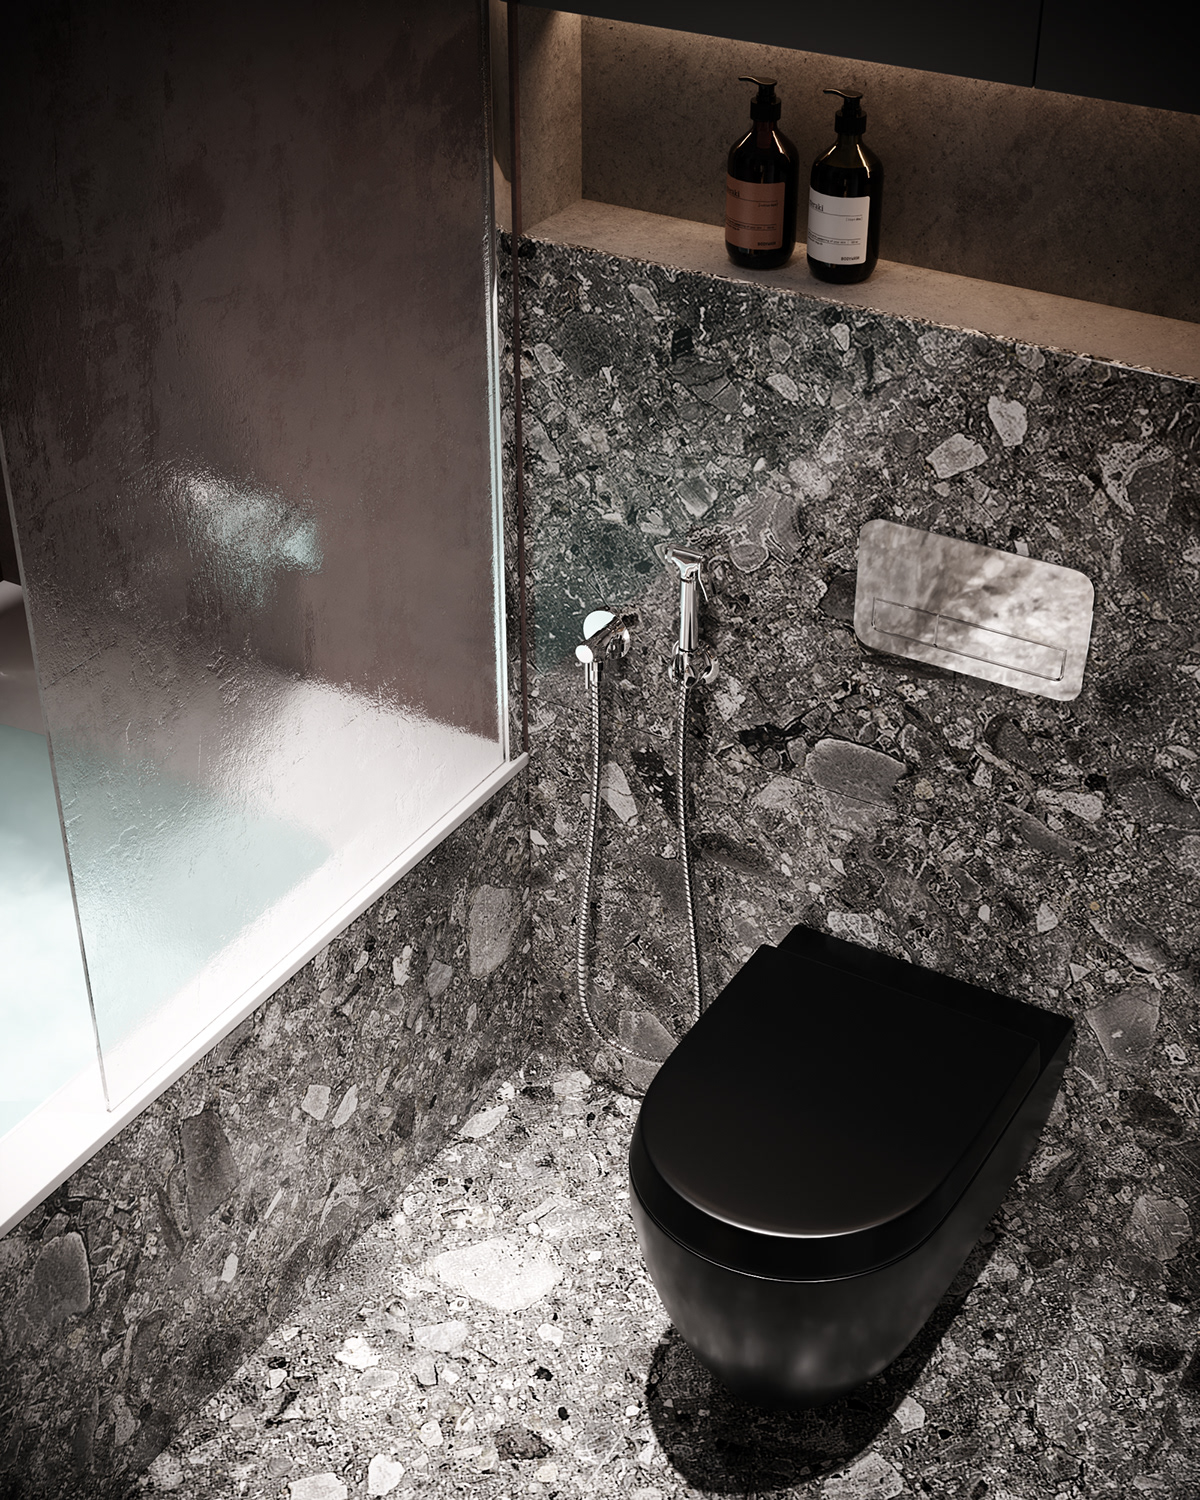 Black becomes the main tone of this mysterious bathroom.